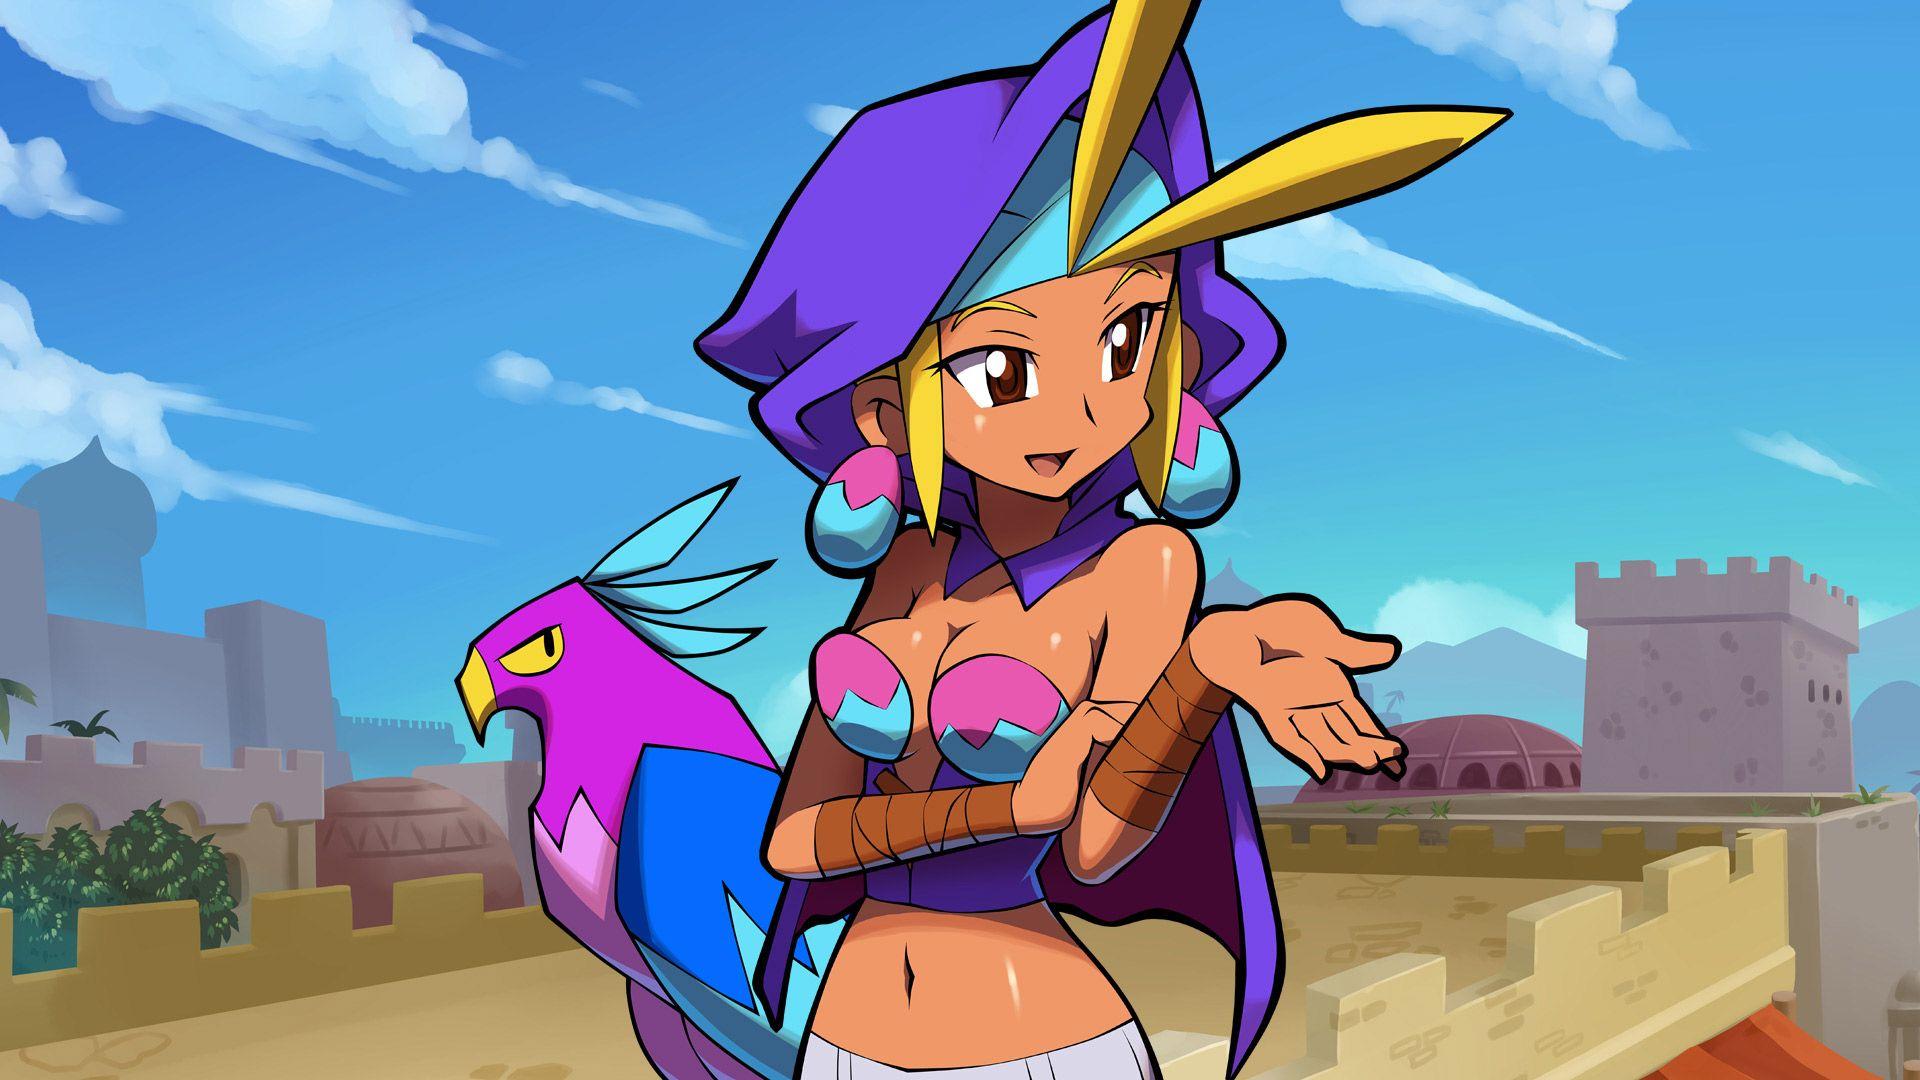 Sky. Wallpaper from Shantae and the Pirate's Curse